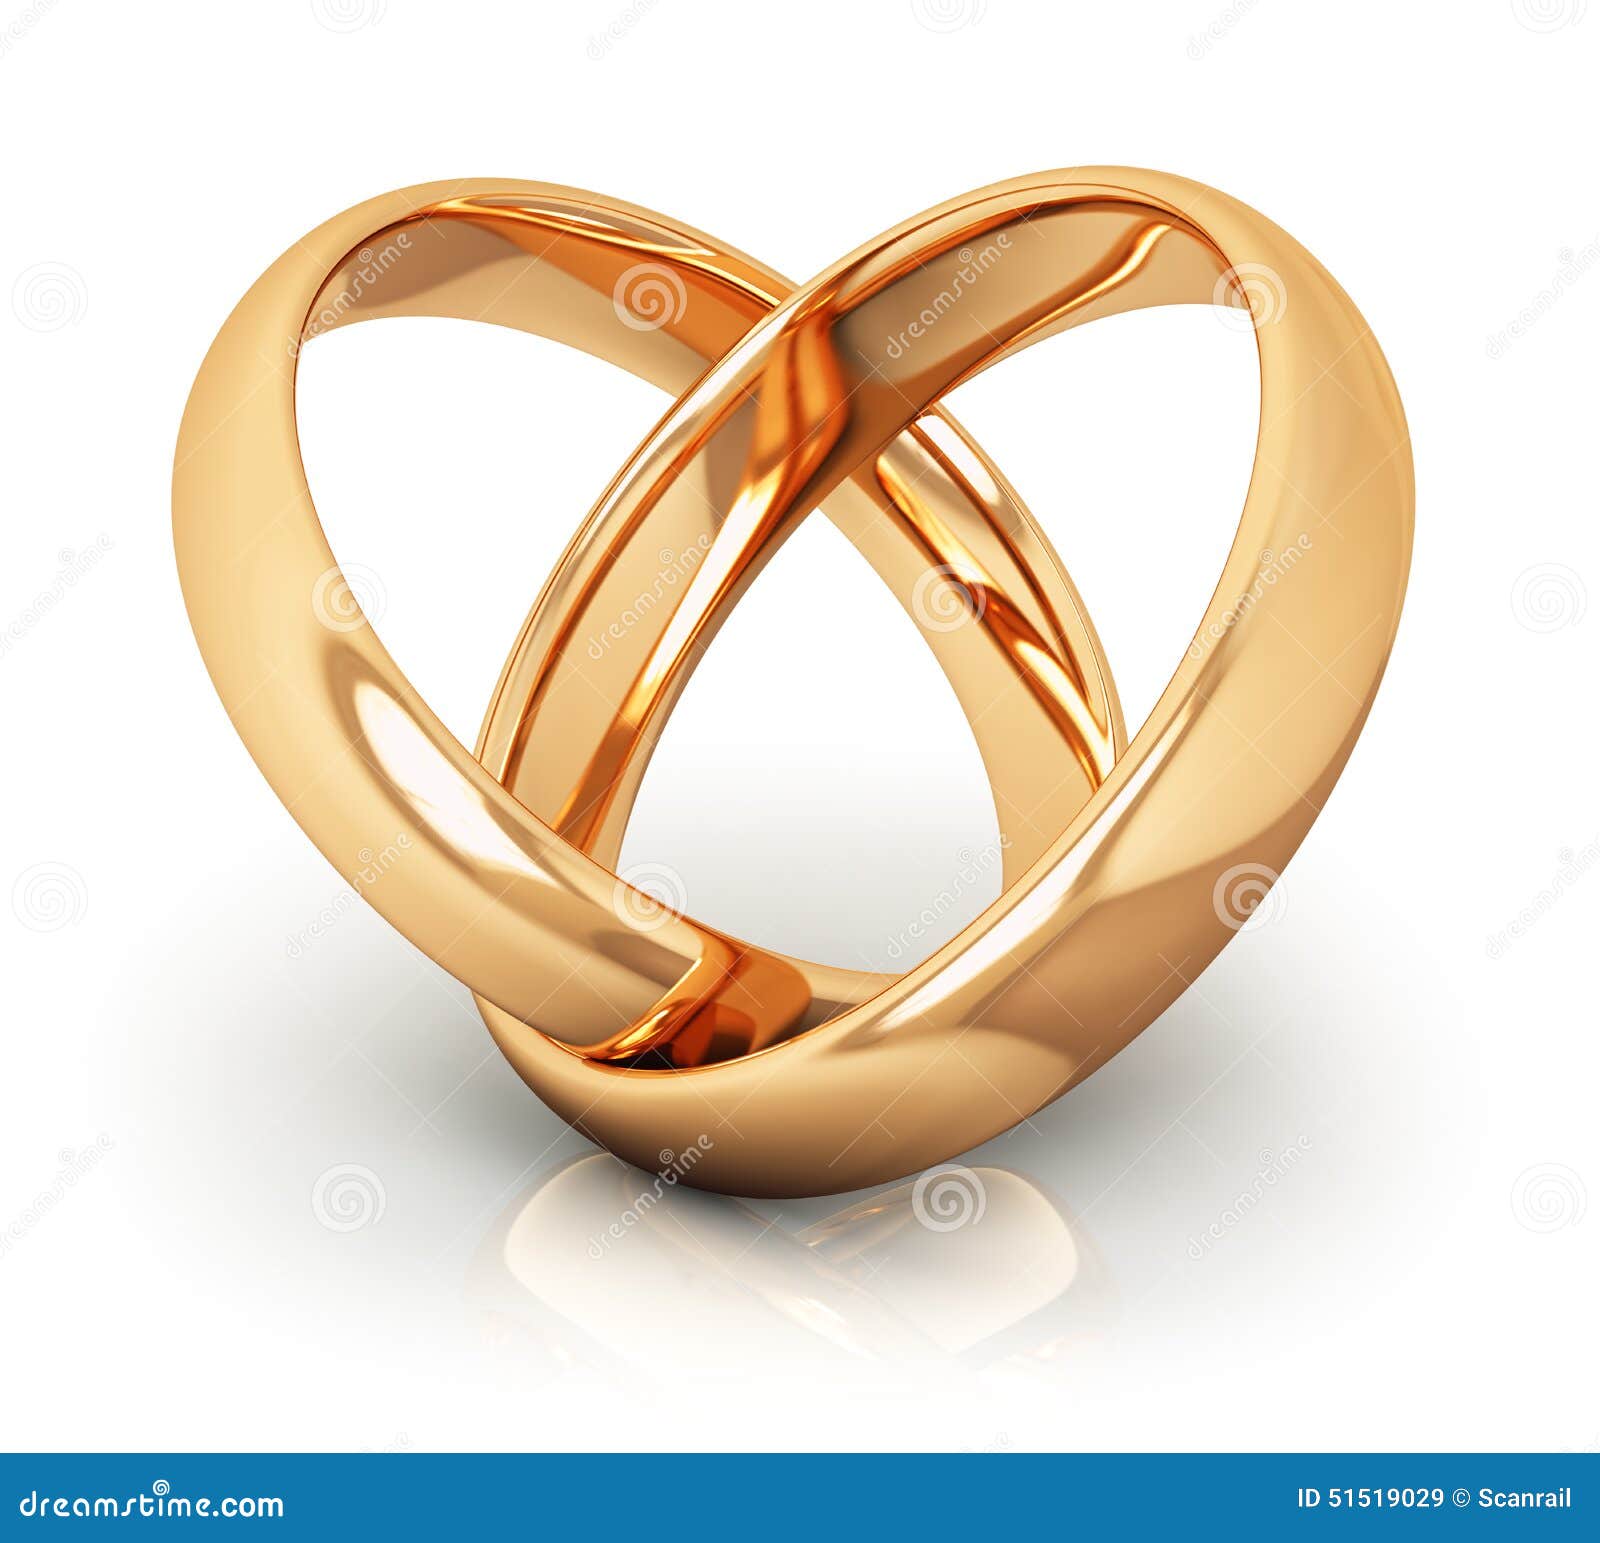 ring ceremony clipart - photo #31